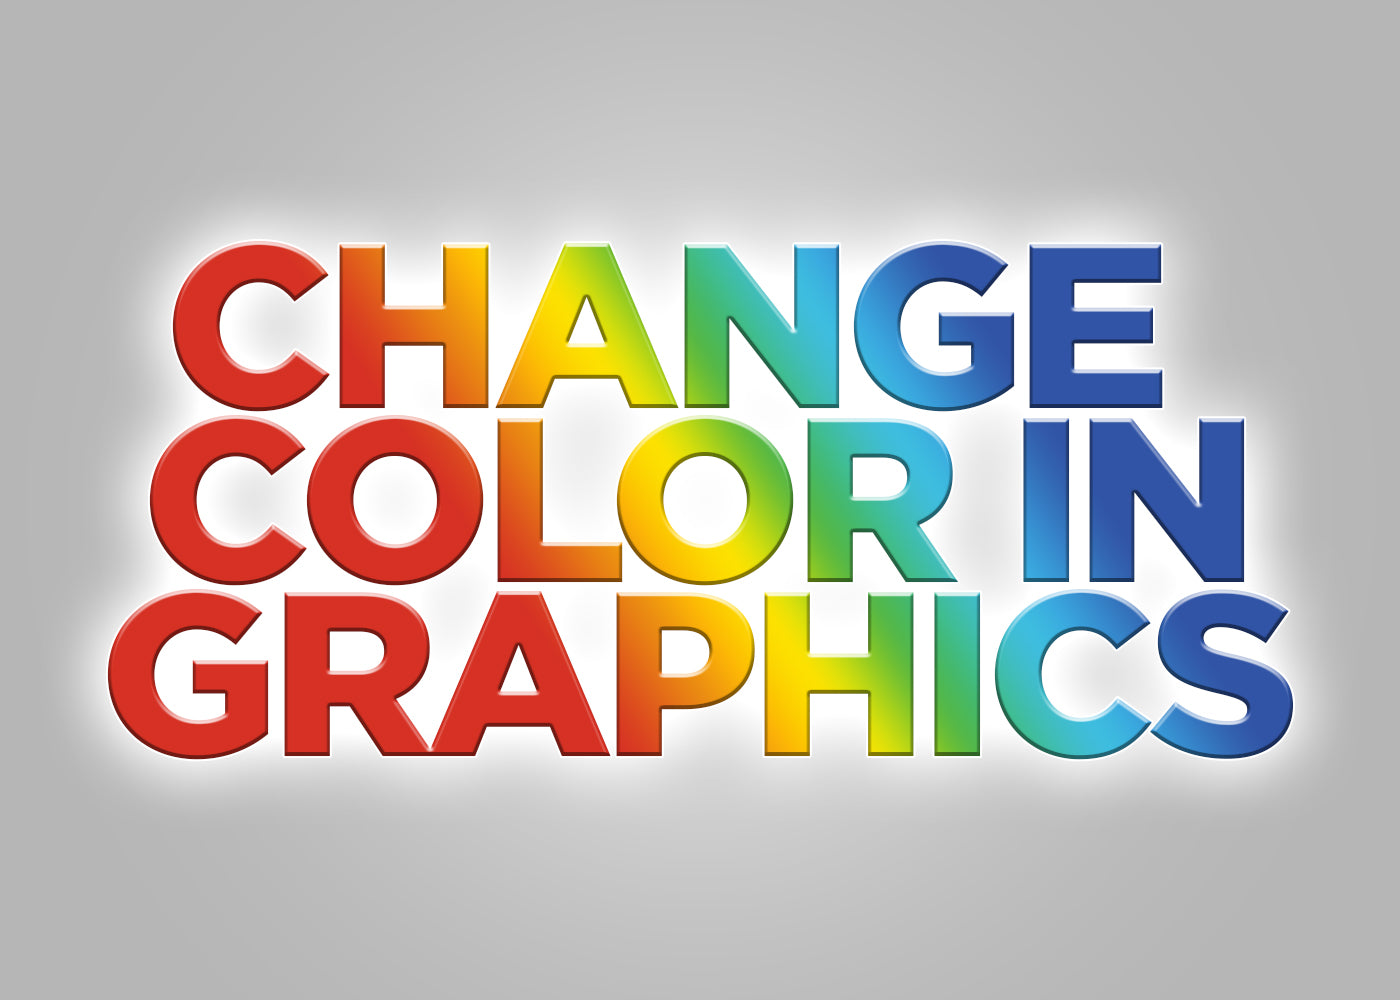 Change Color In Graphics (Limitations Apply)